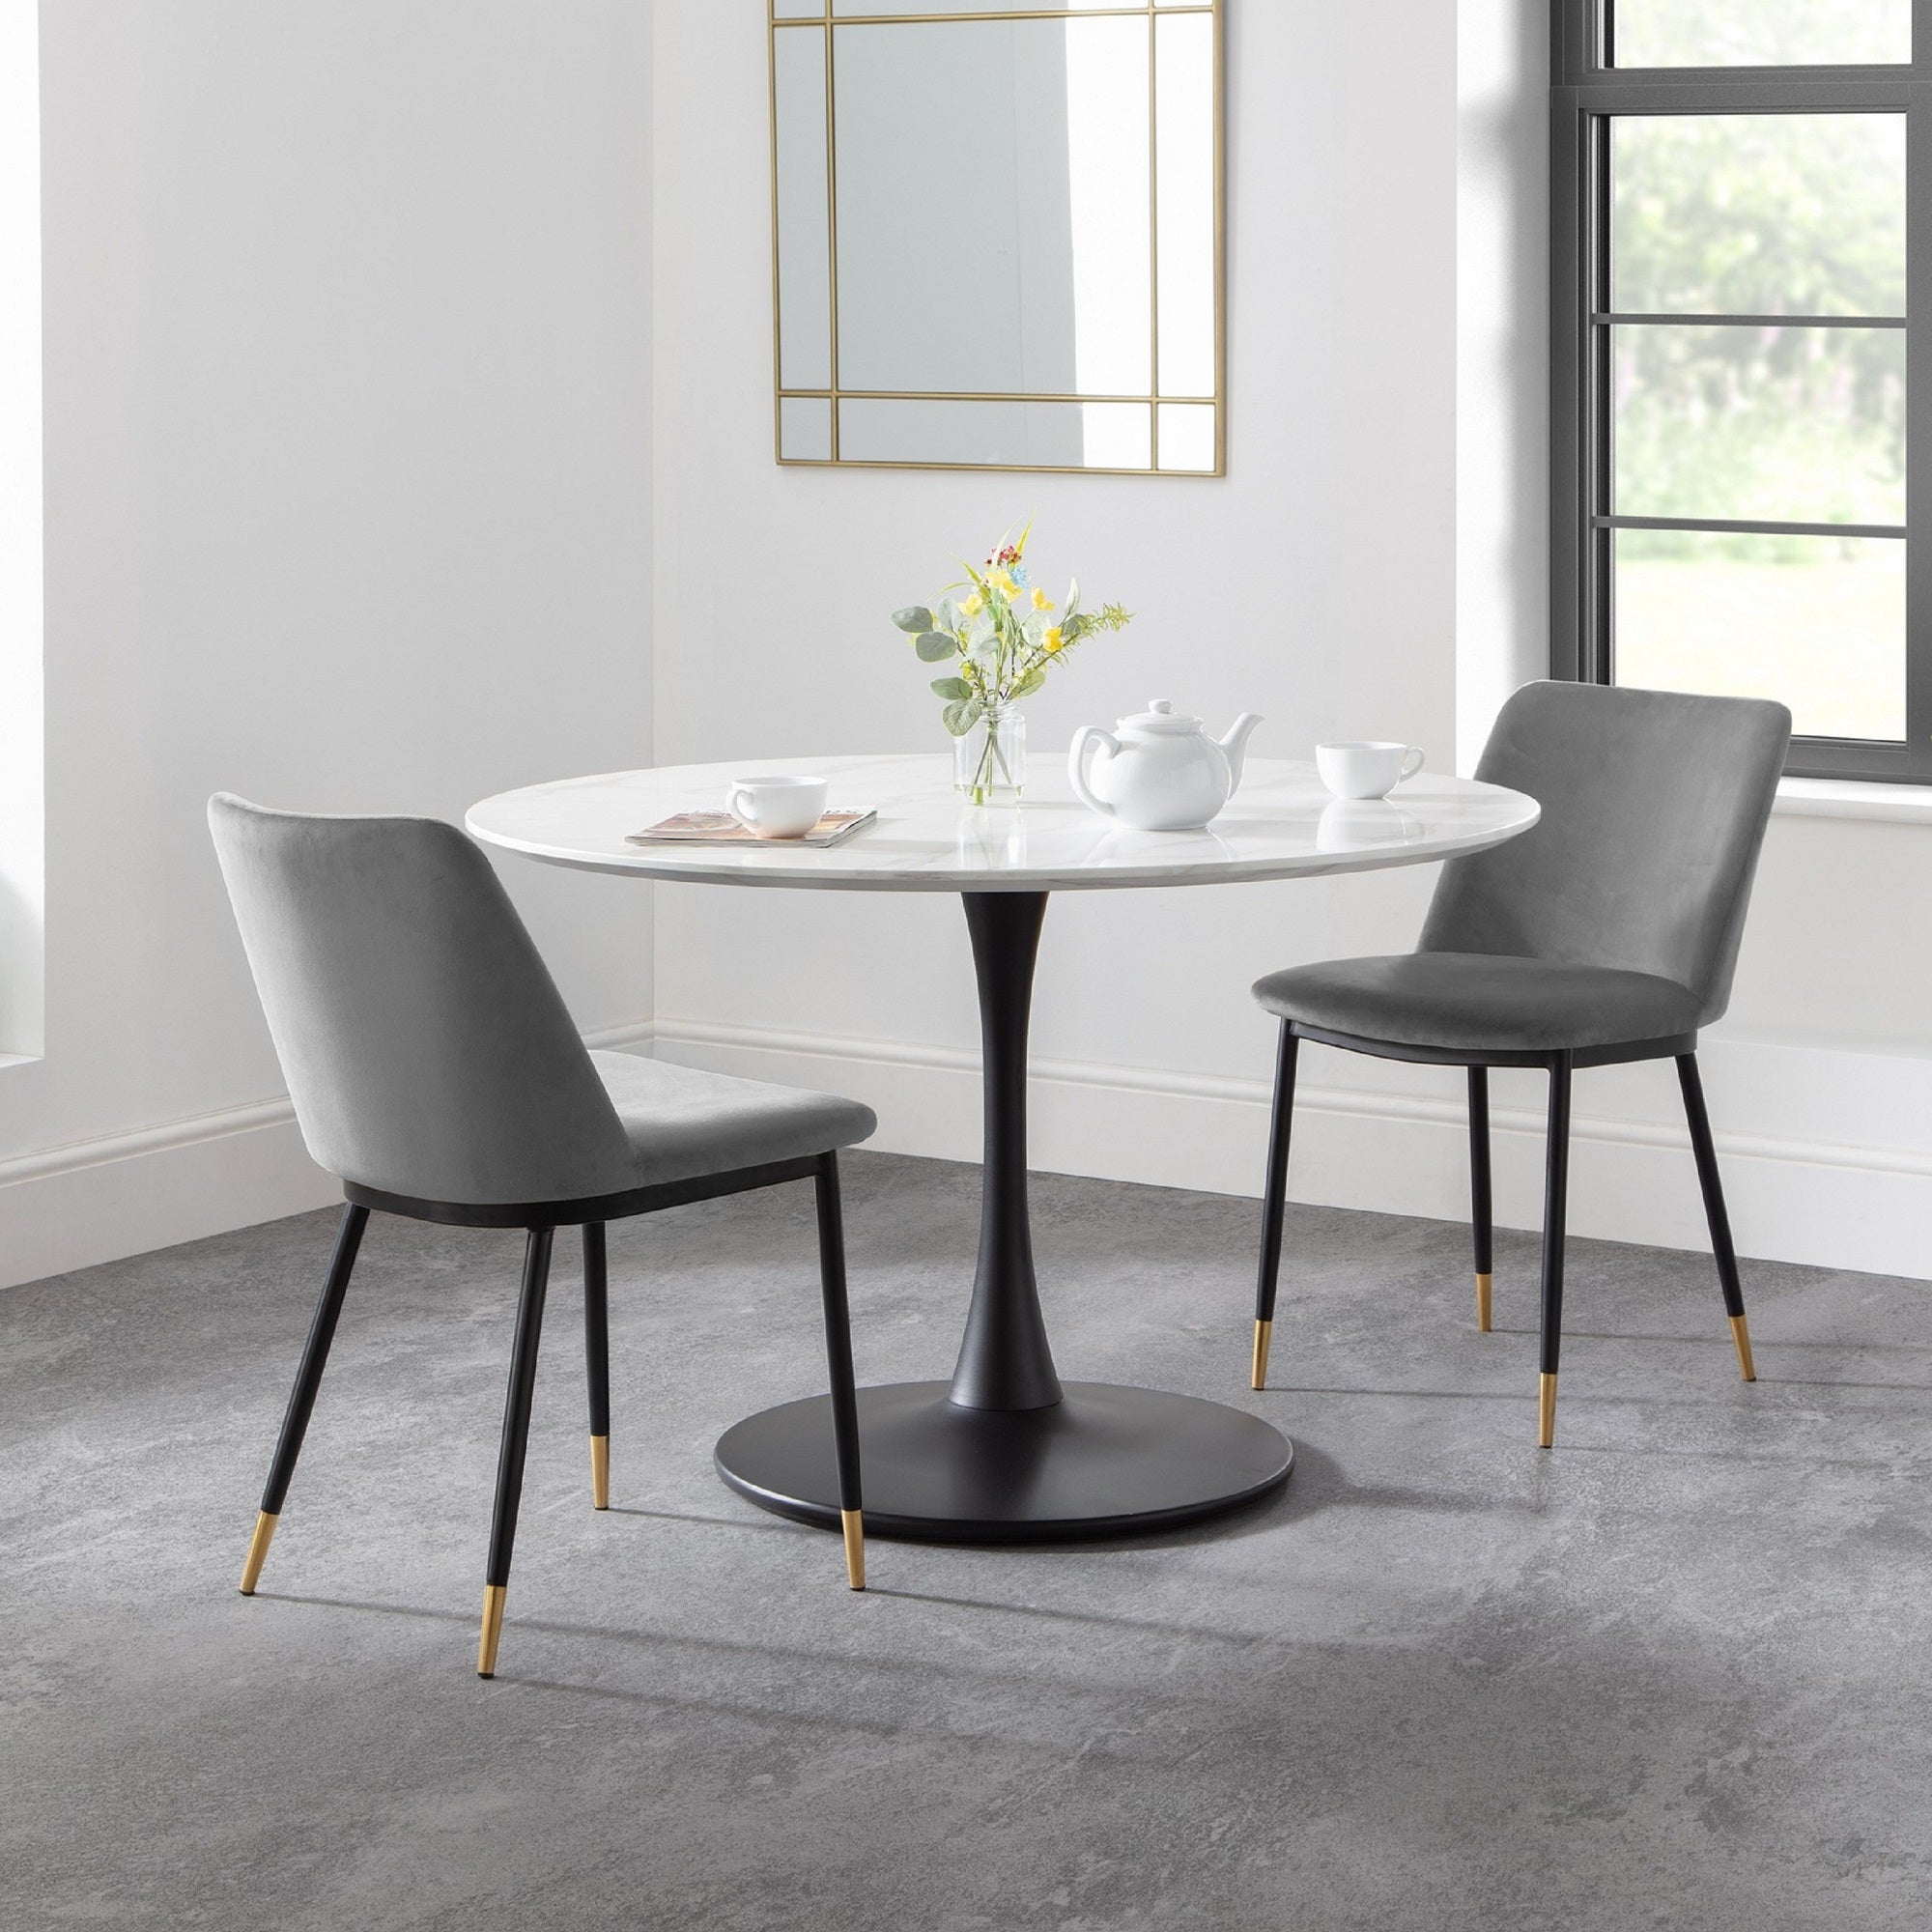 Holland Round Pedestal Dining Table With 2 Delaunay Chairs Grey